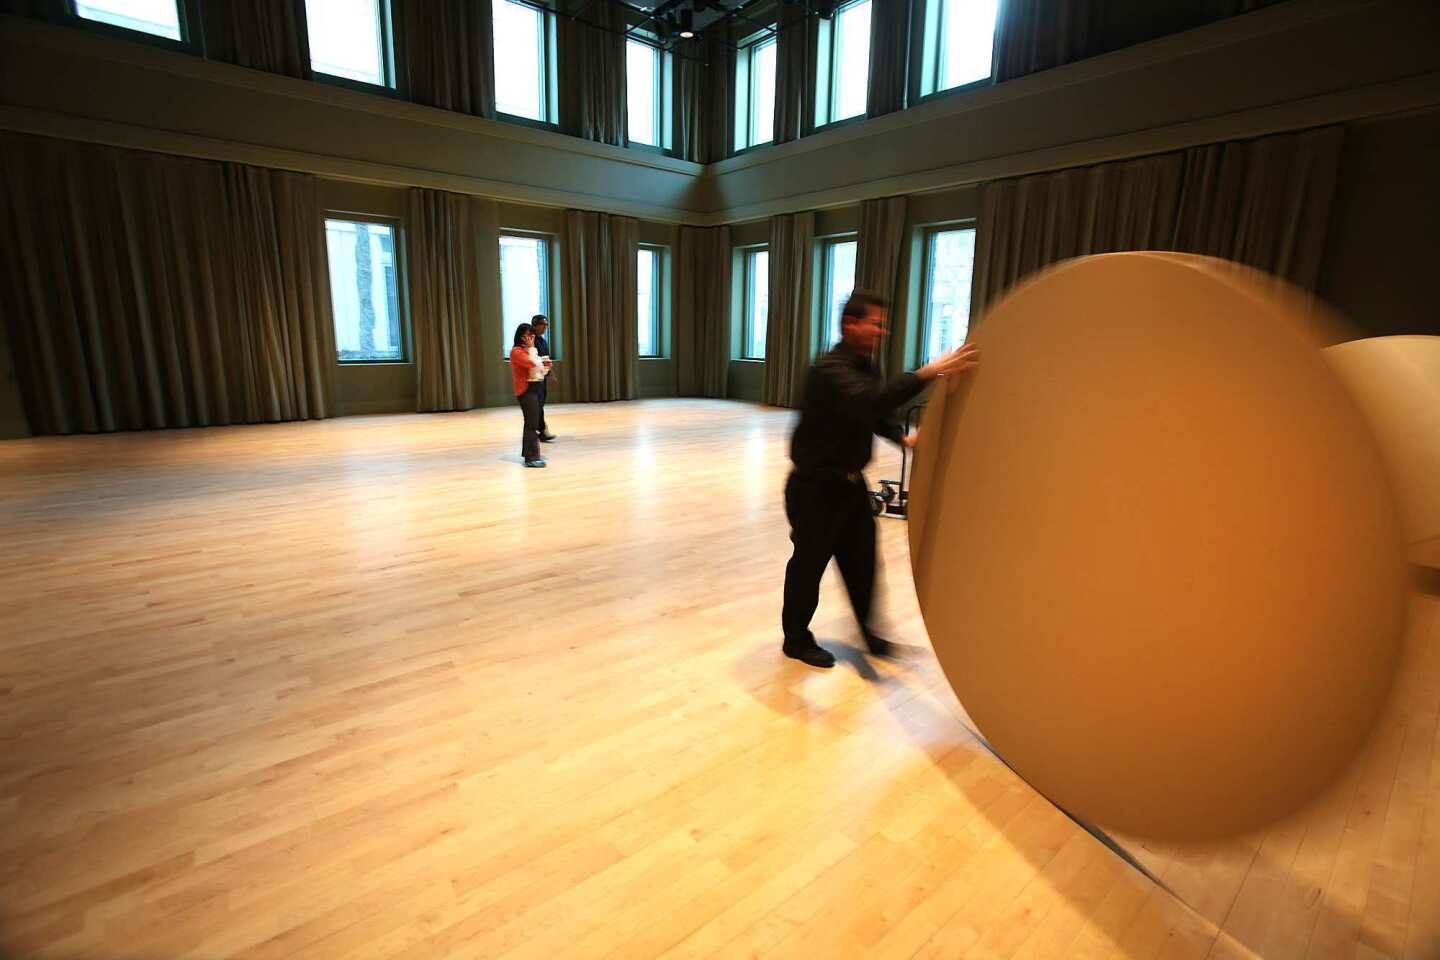 Inside the Troesh studio theatre, which features learning facilities.